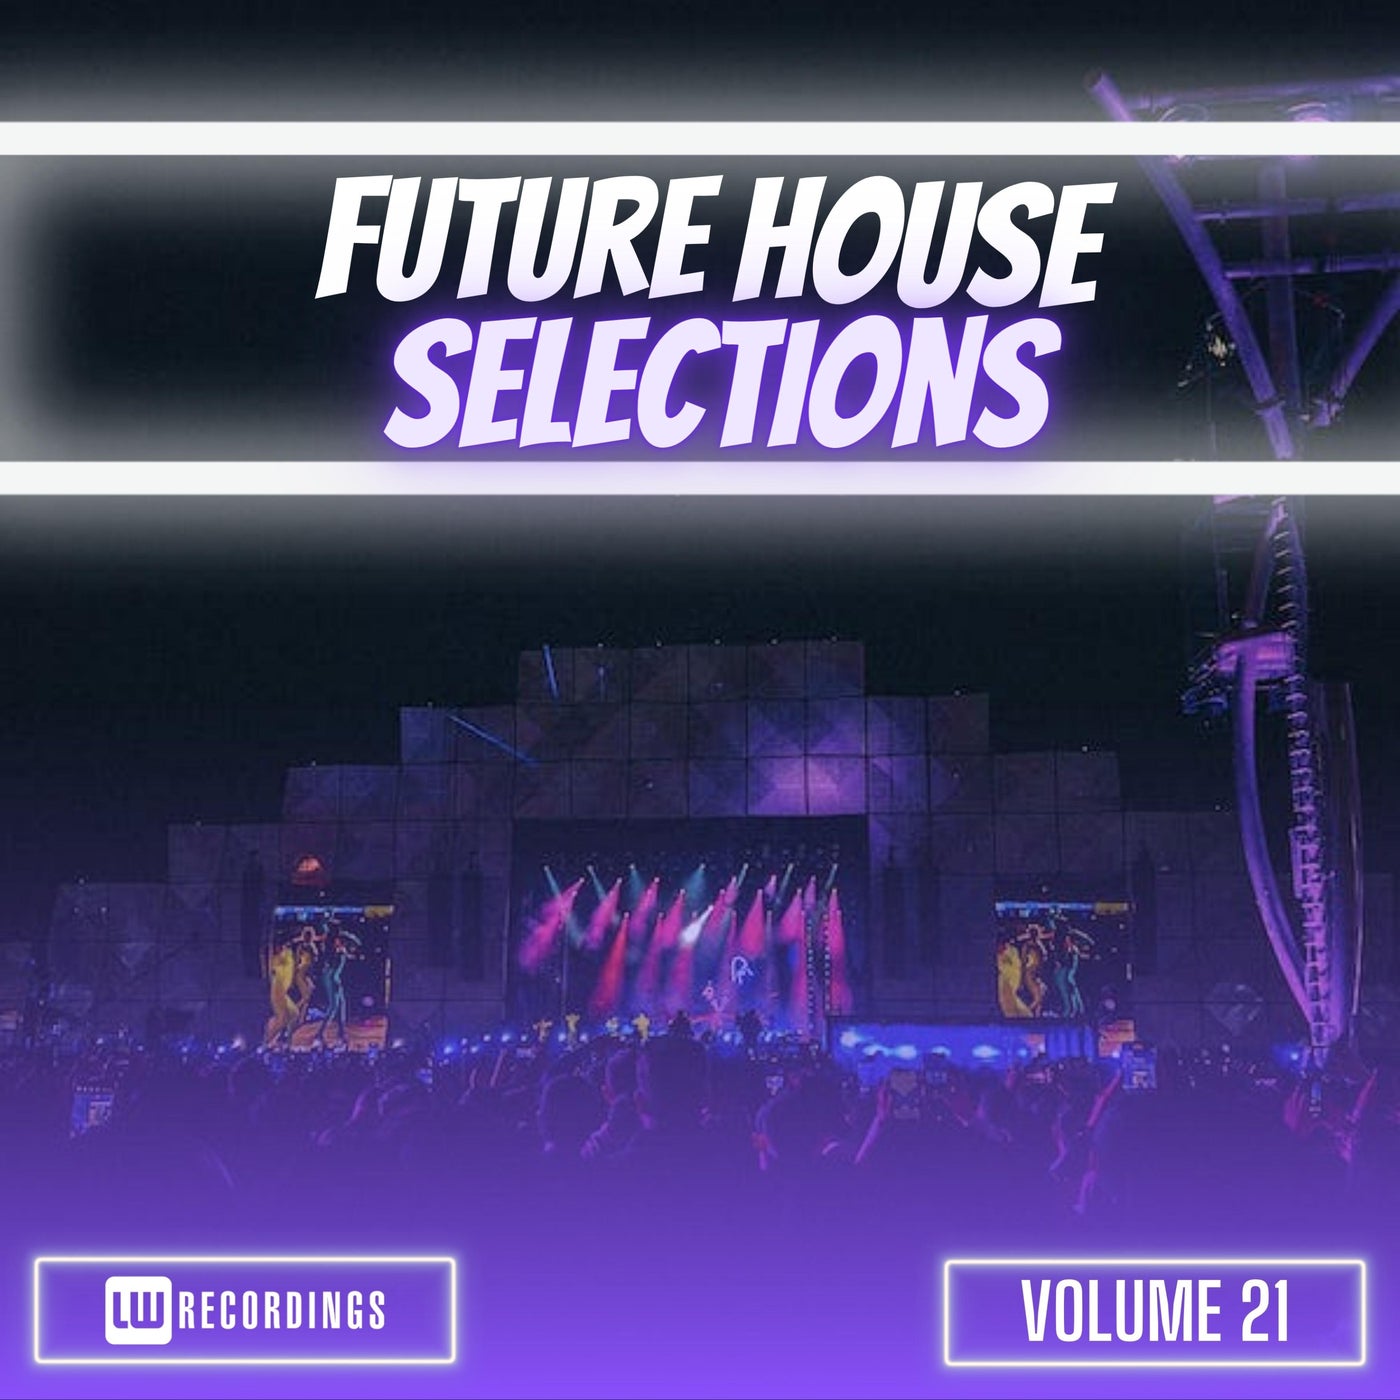 Future House Selections, Vol. 21